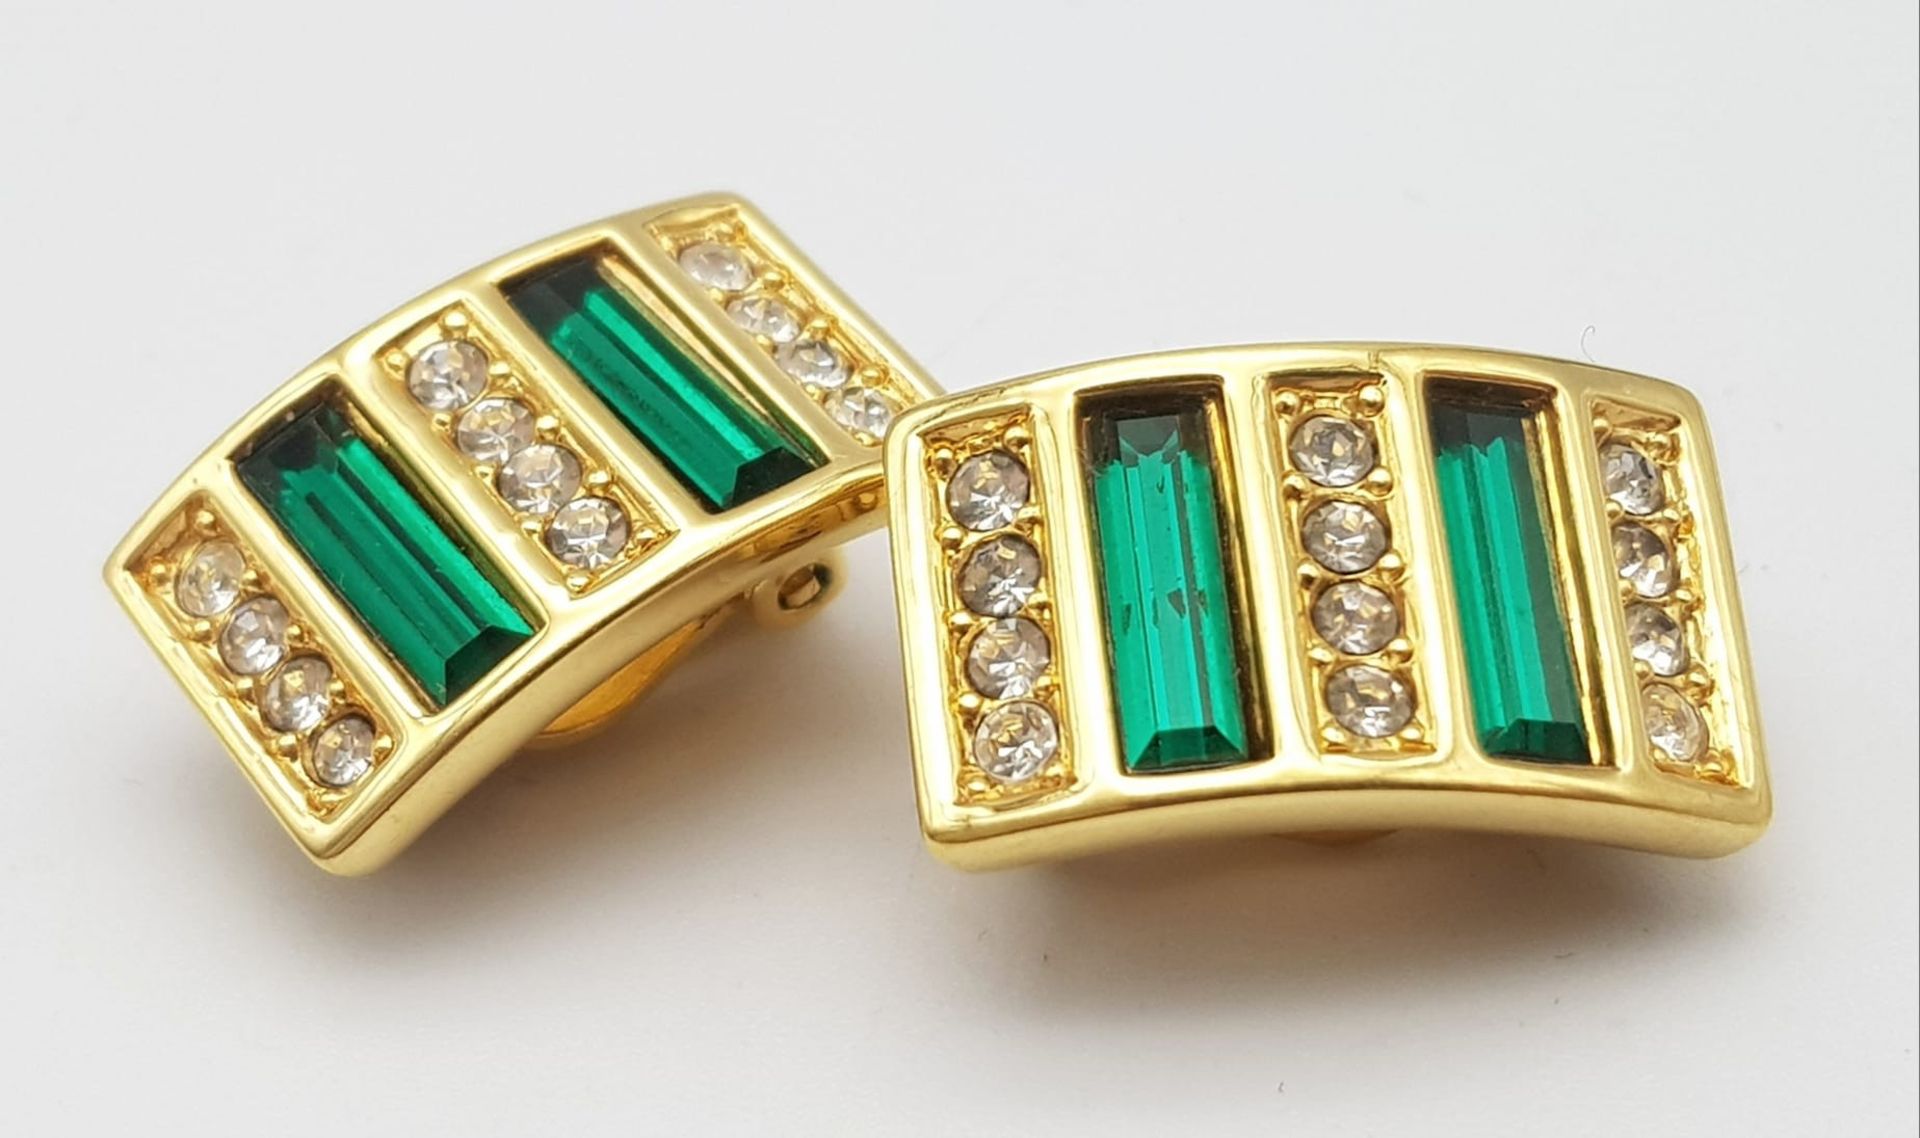 A Pair of Rare Vintage Swarovski Emerald Green and White Crystal Dress Earrings. Gilded setting.